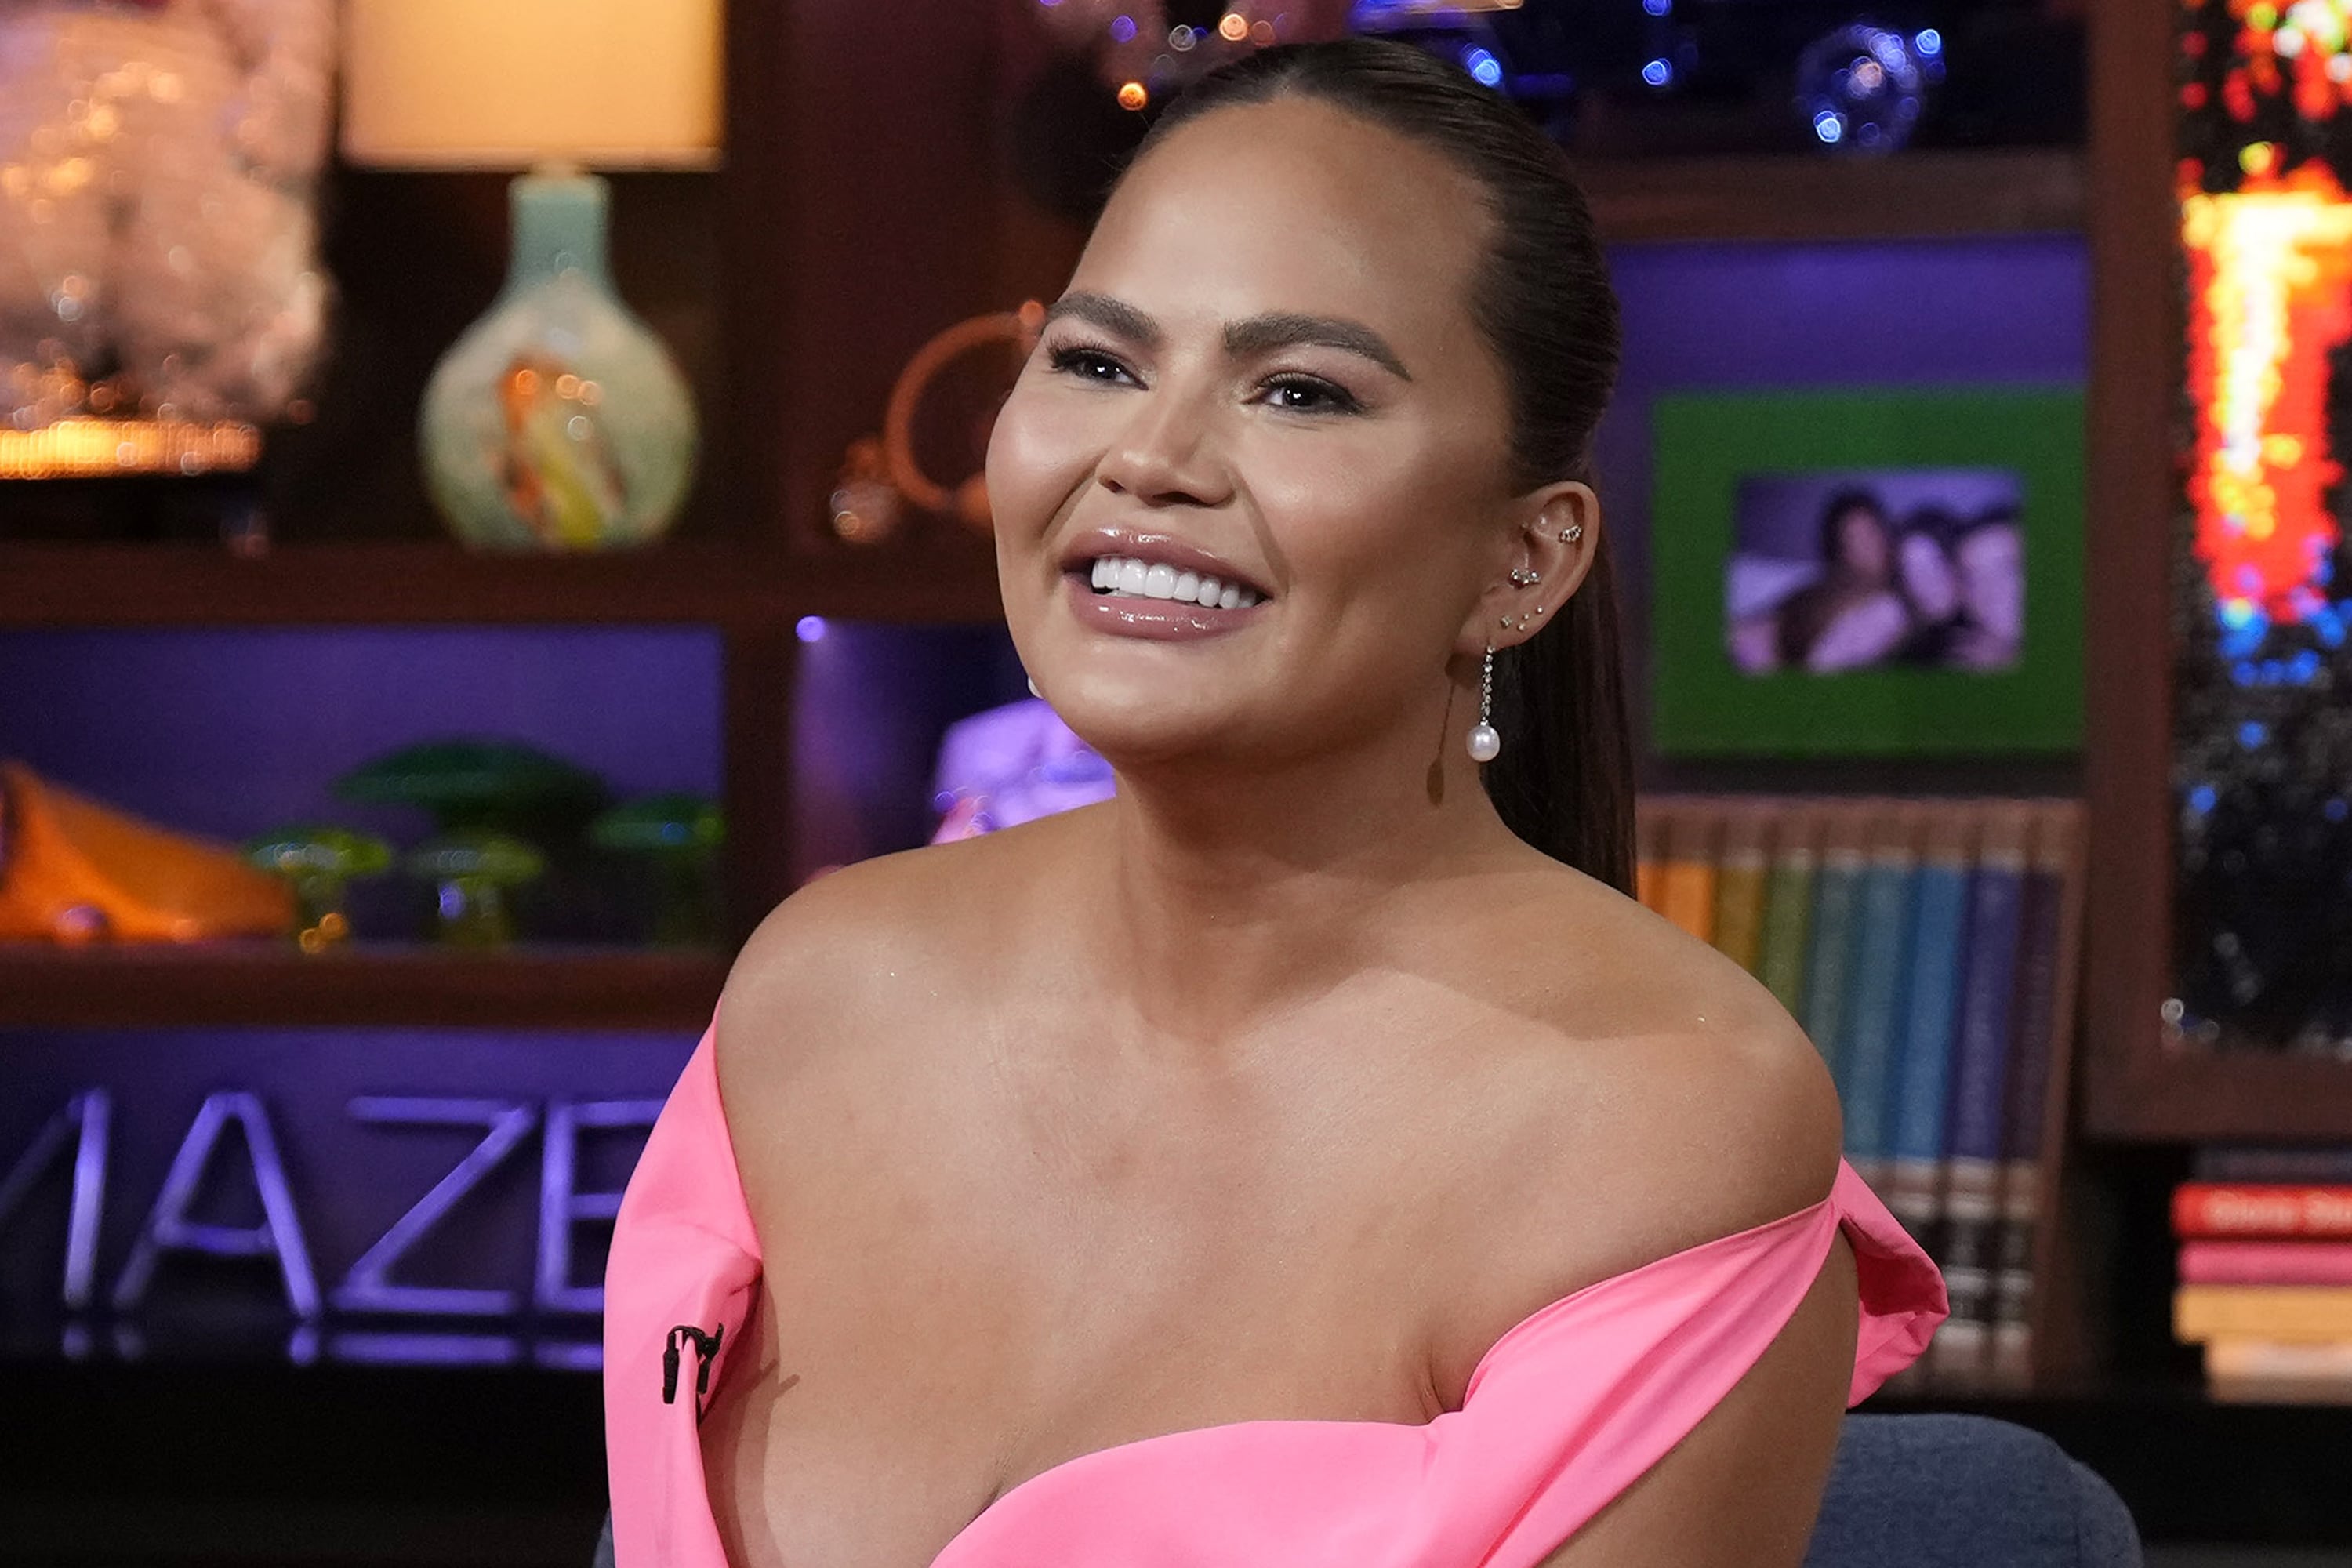 Chrissy Teigen Stumbles Out of Her Heels to Imitate That Viral “Barbie” Foot Scene